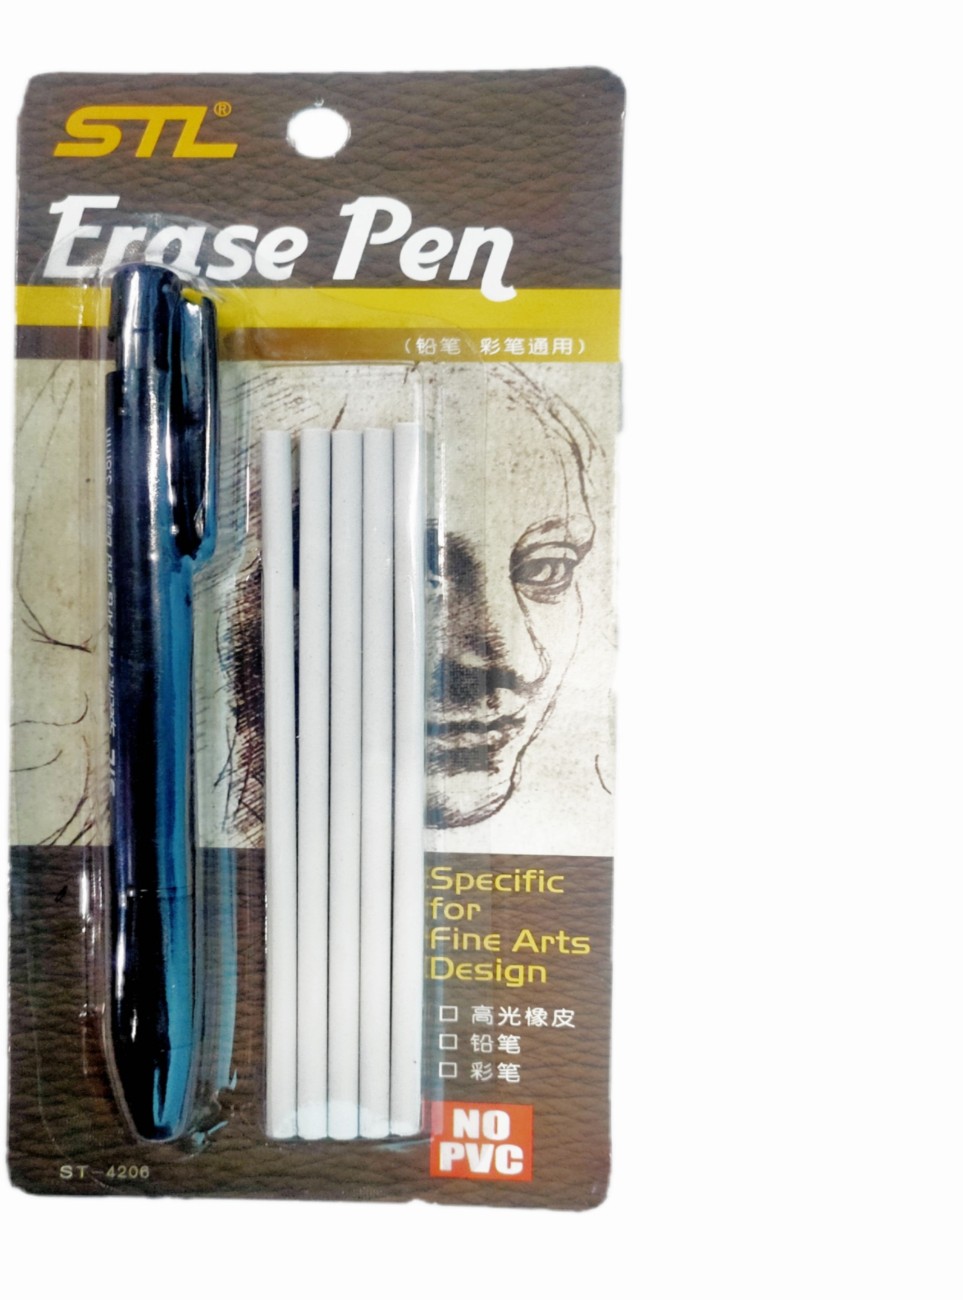 Electric Eraser for Artists Tenwin Electric Battery Operated Automatic  Pencil Eraser with 22 Eraser Refills Refills for Drawing Diameter